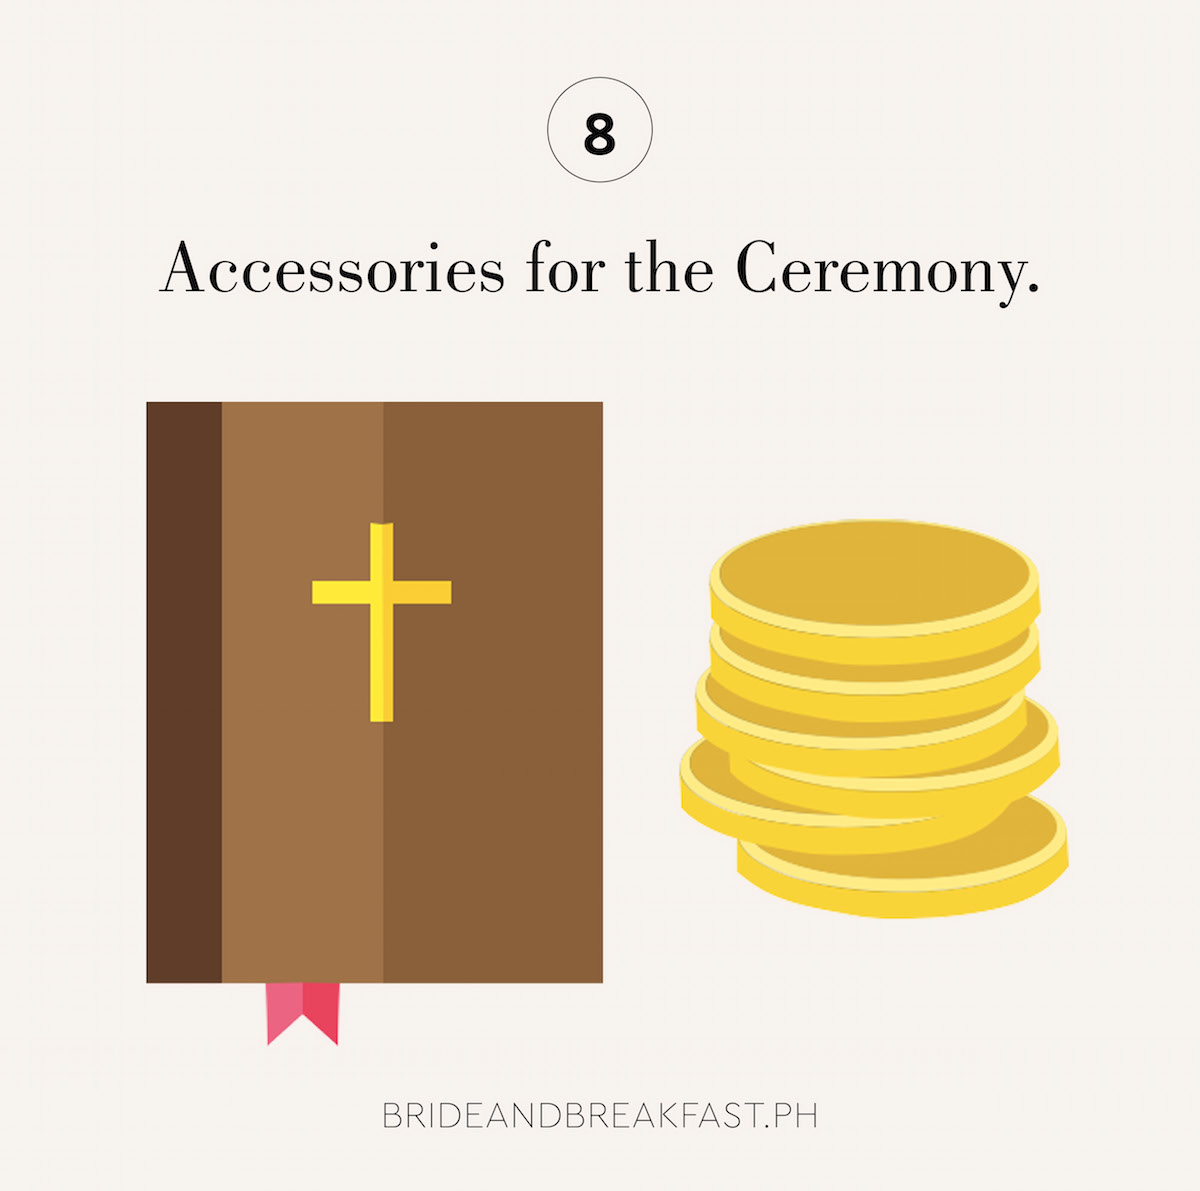 8 Accessories for the Ceremony.